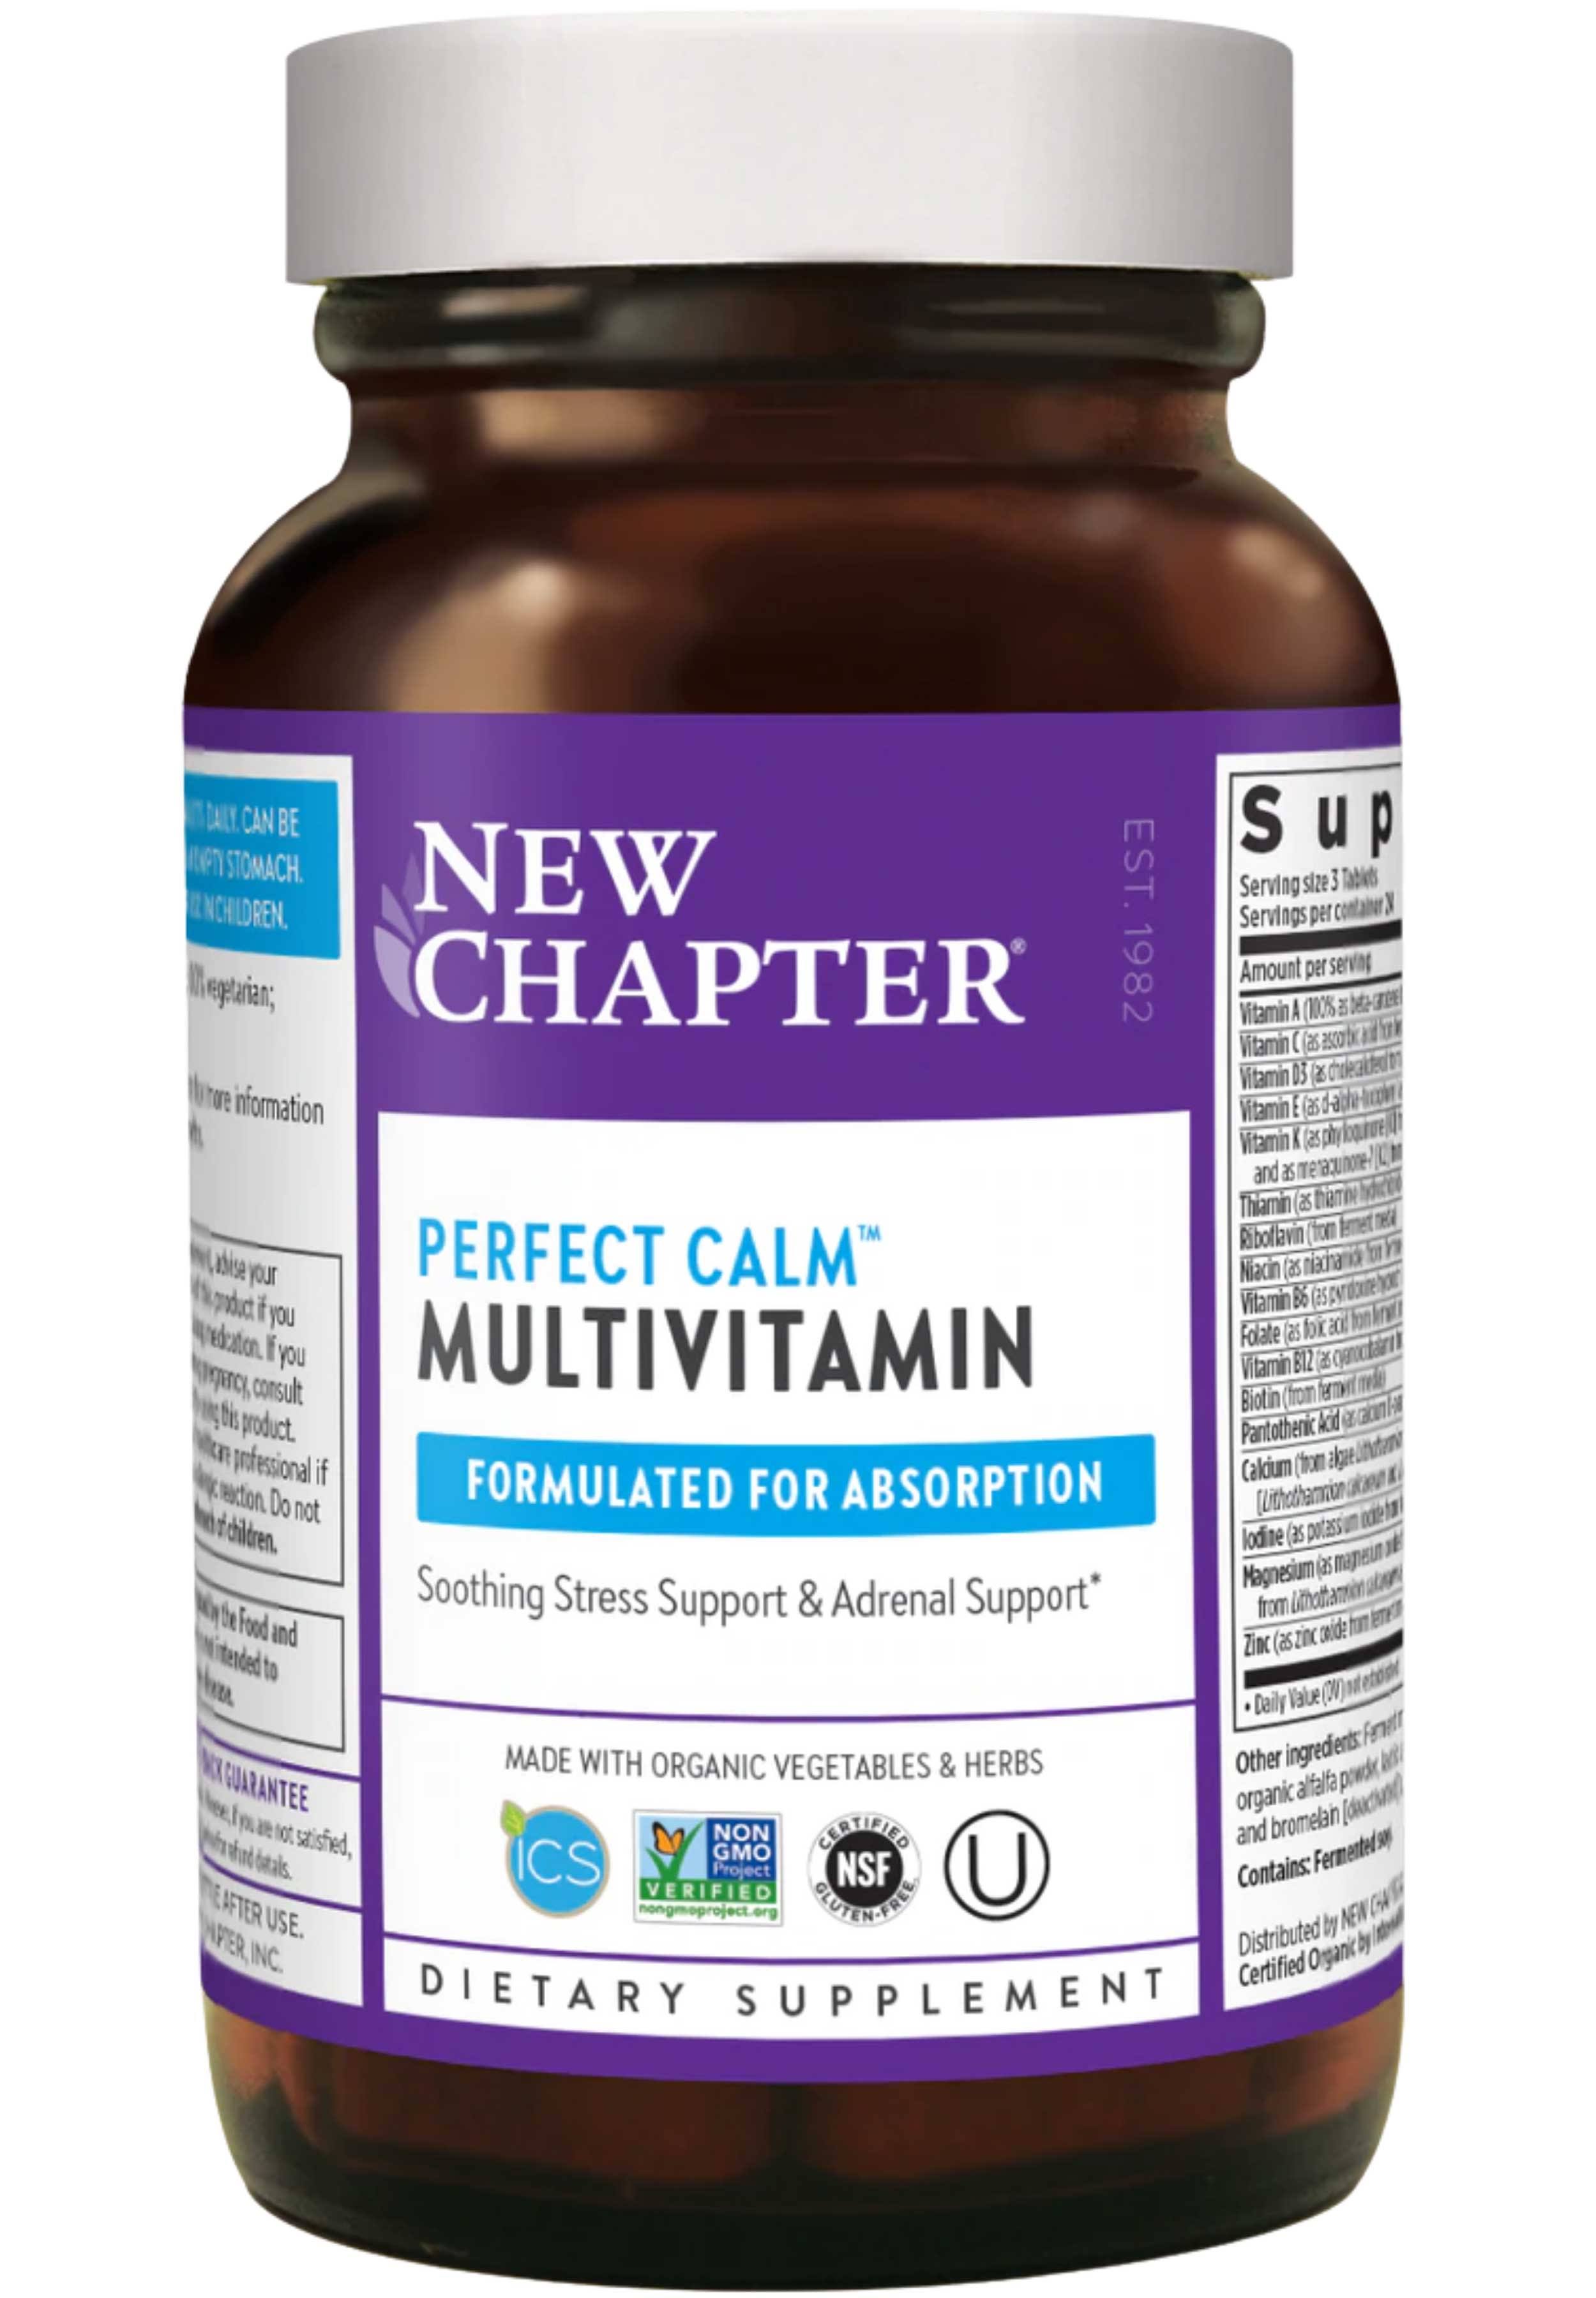 New Chapter Perfect Calm Multivitamins